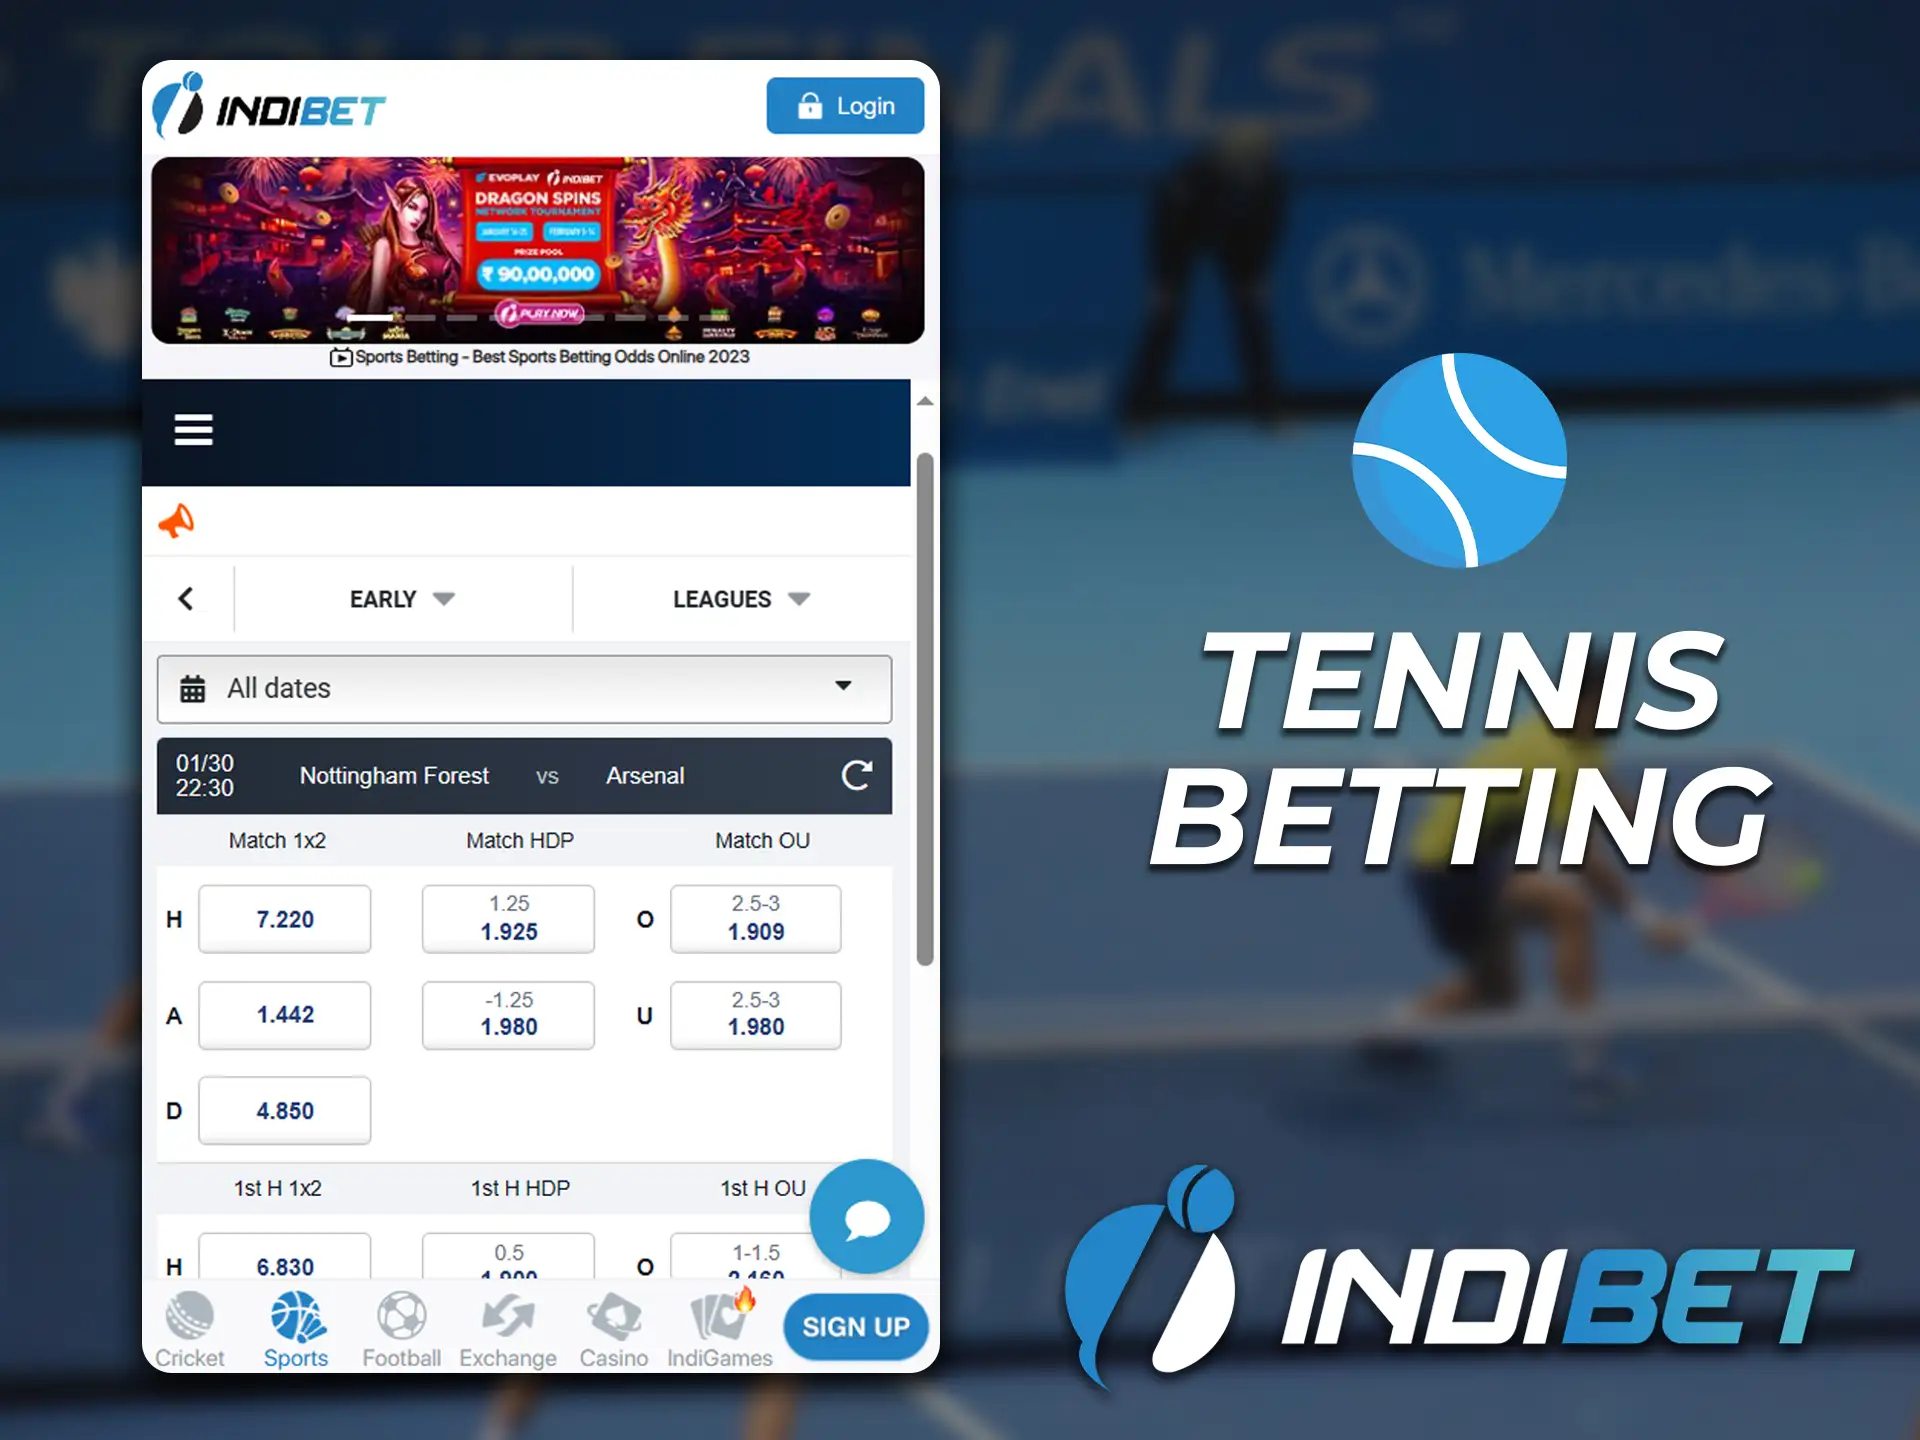 Tennis betting is available on the Indibet app.